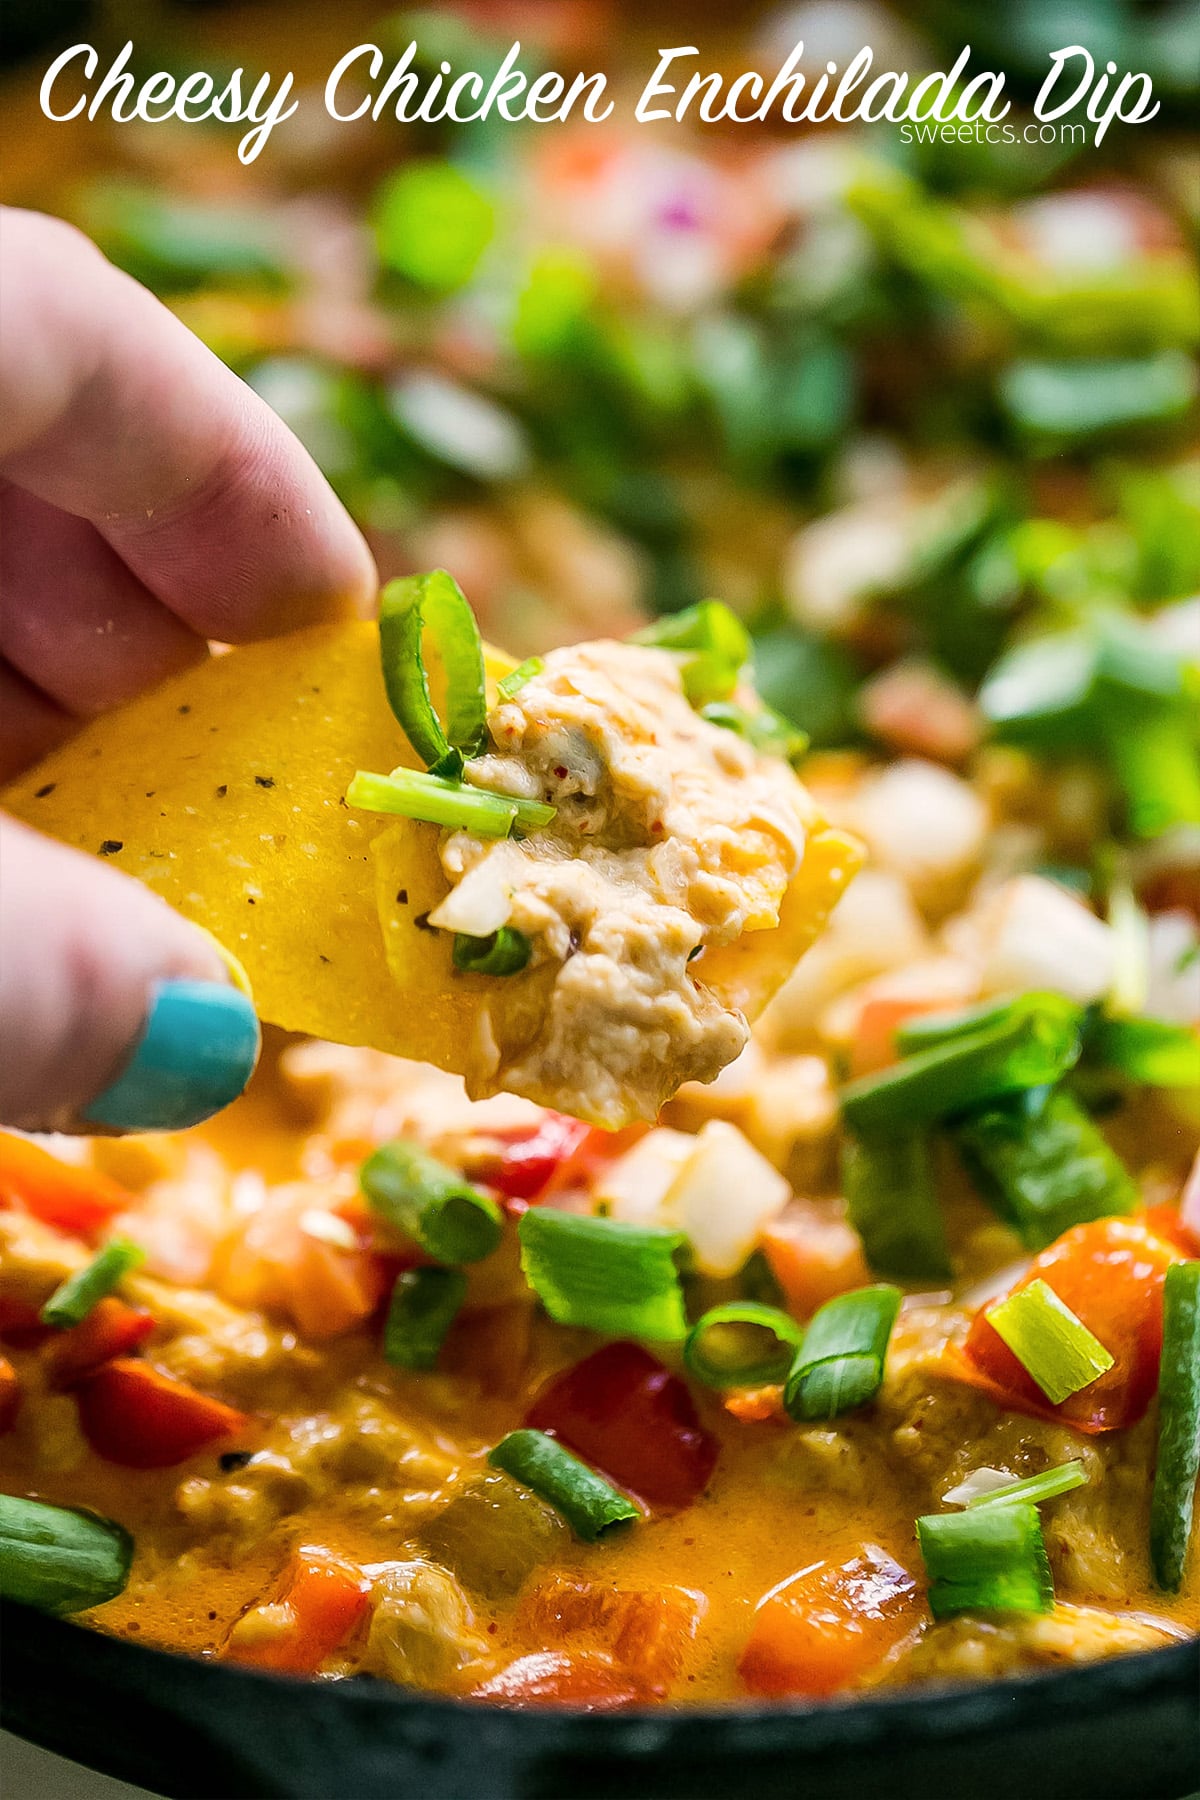 This delicious chicken enchilada dip is full of flavor and so amazing!